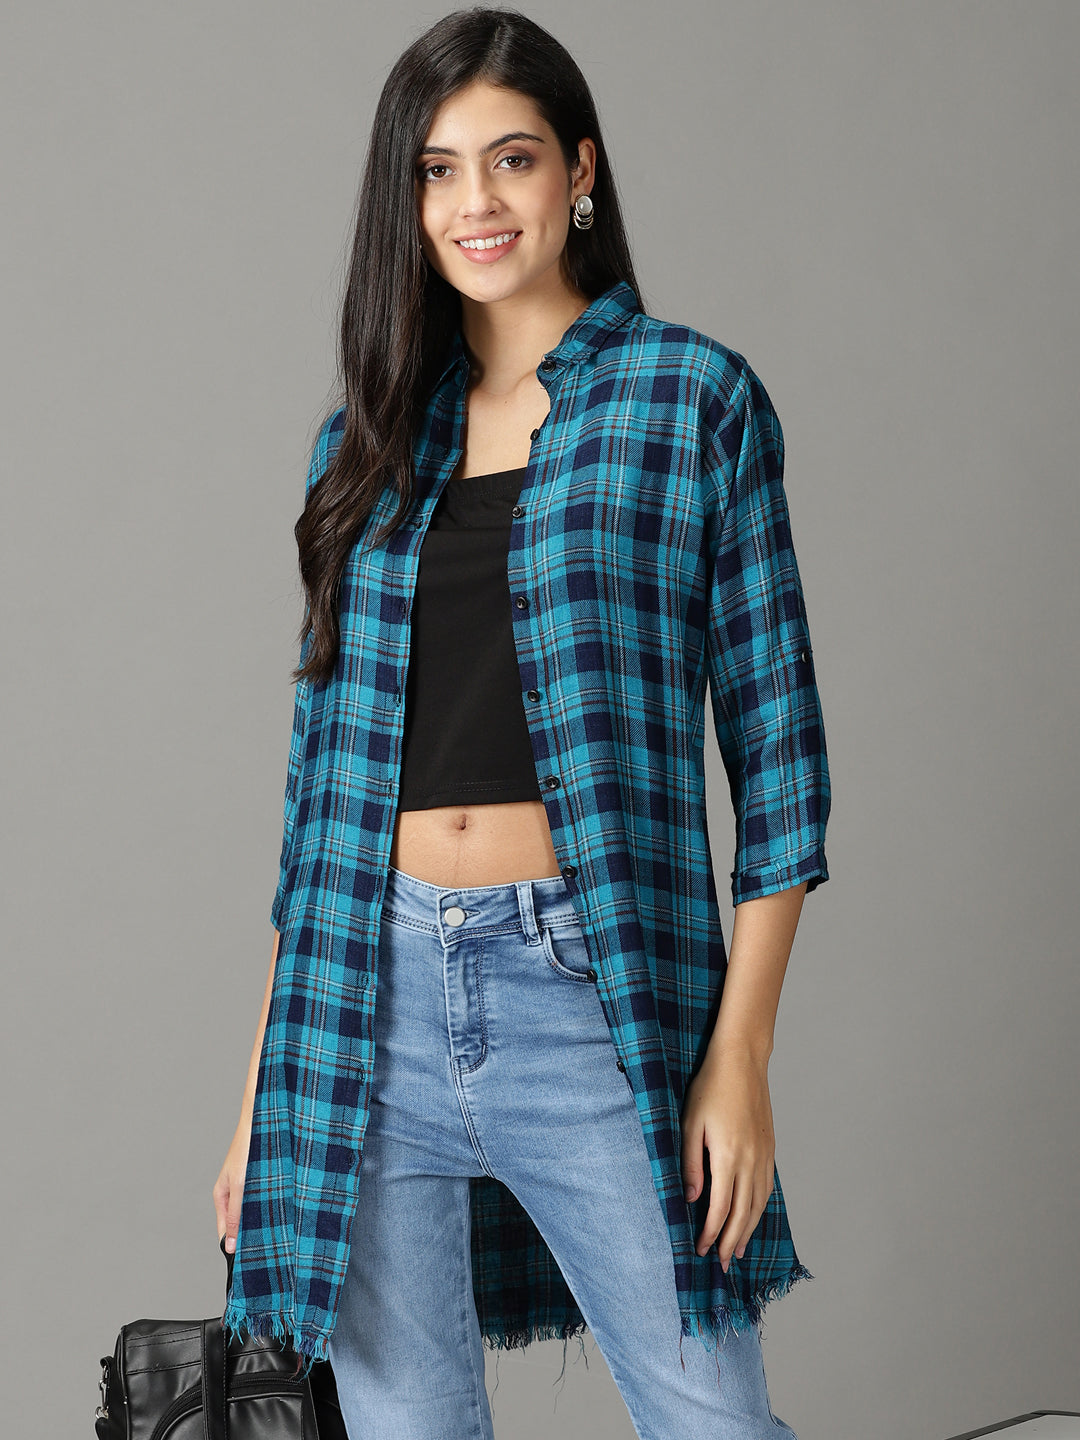 Women's Teal Checked Shirt